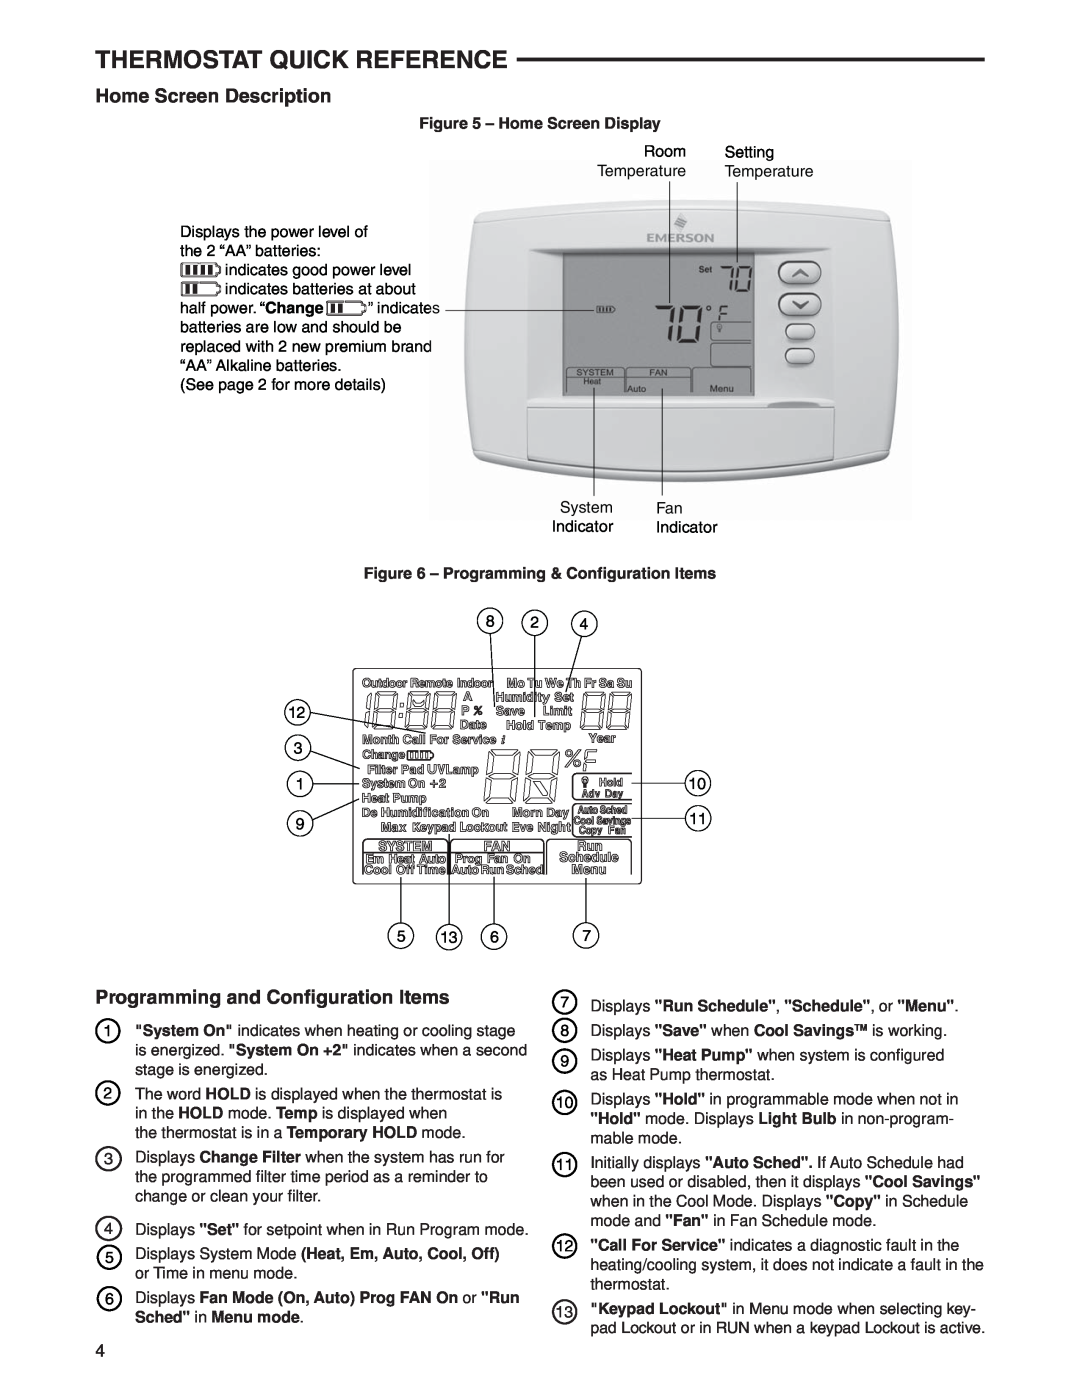 White Rodgers 1F95-0680 Thermostat Quick Reference, Home Screen Description, Programming and Conﬁguration Items 